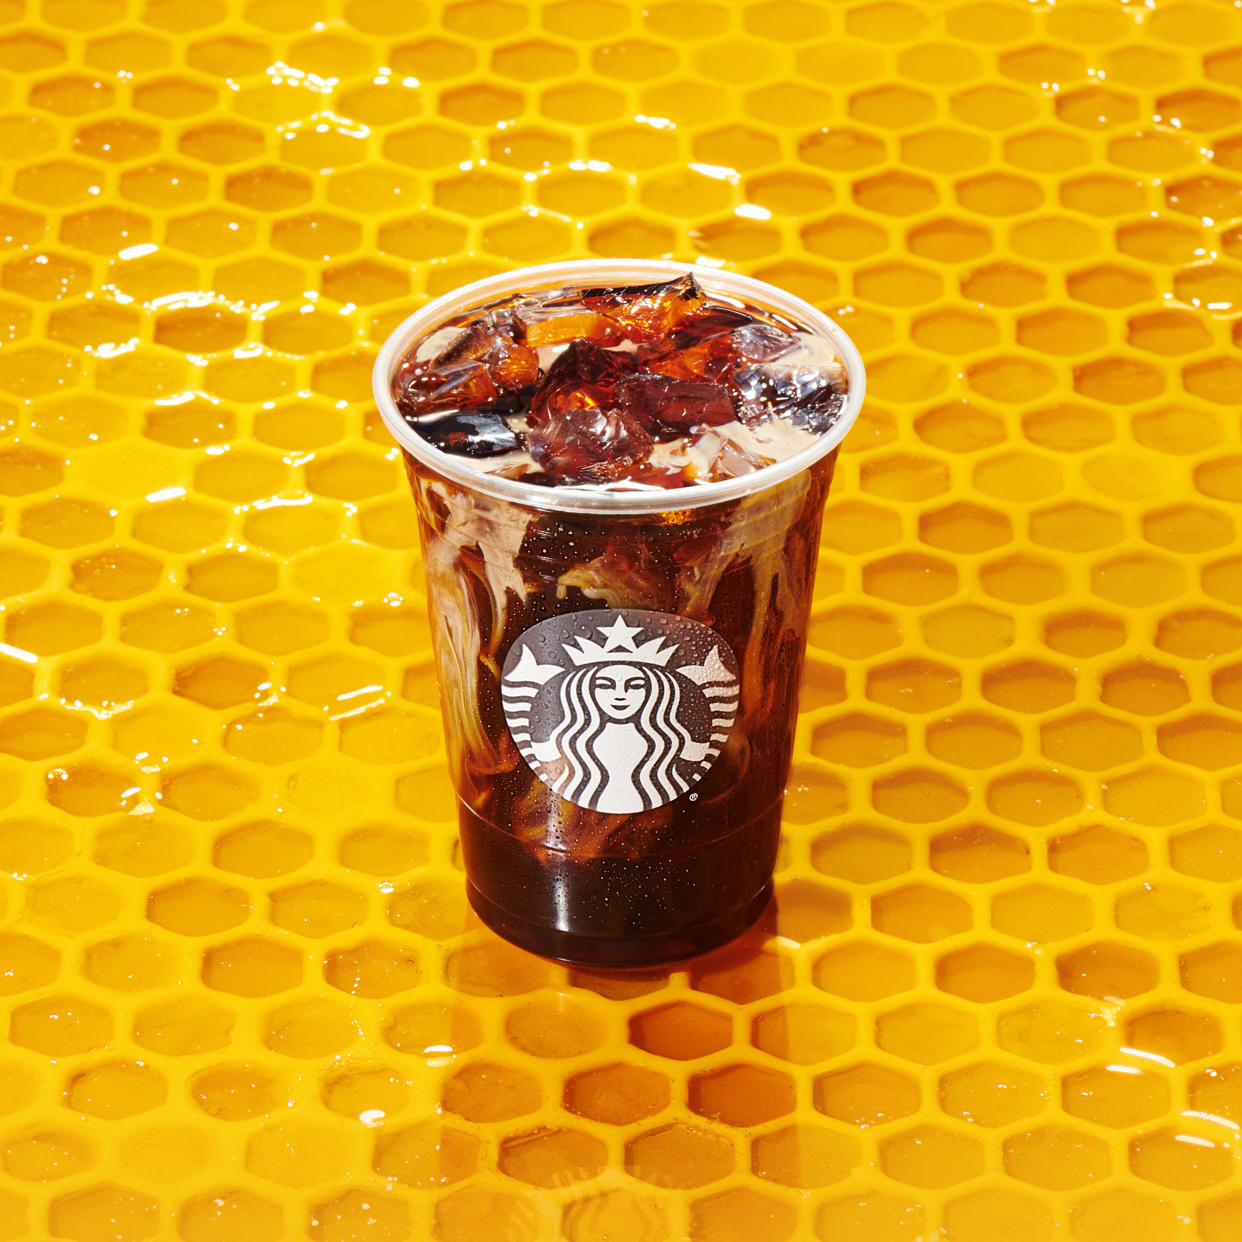 The Honey Almondmilk Cold Brew is another new addition to the Starbucks menu to start the new year.  (Starbucks)